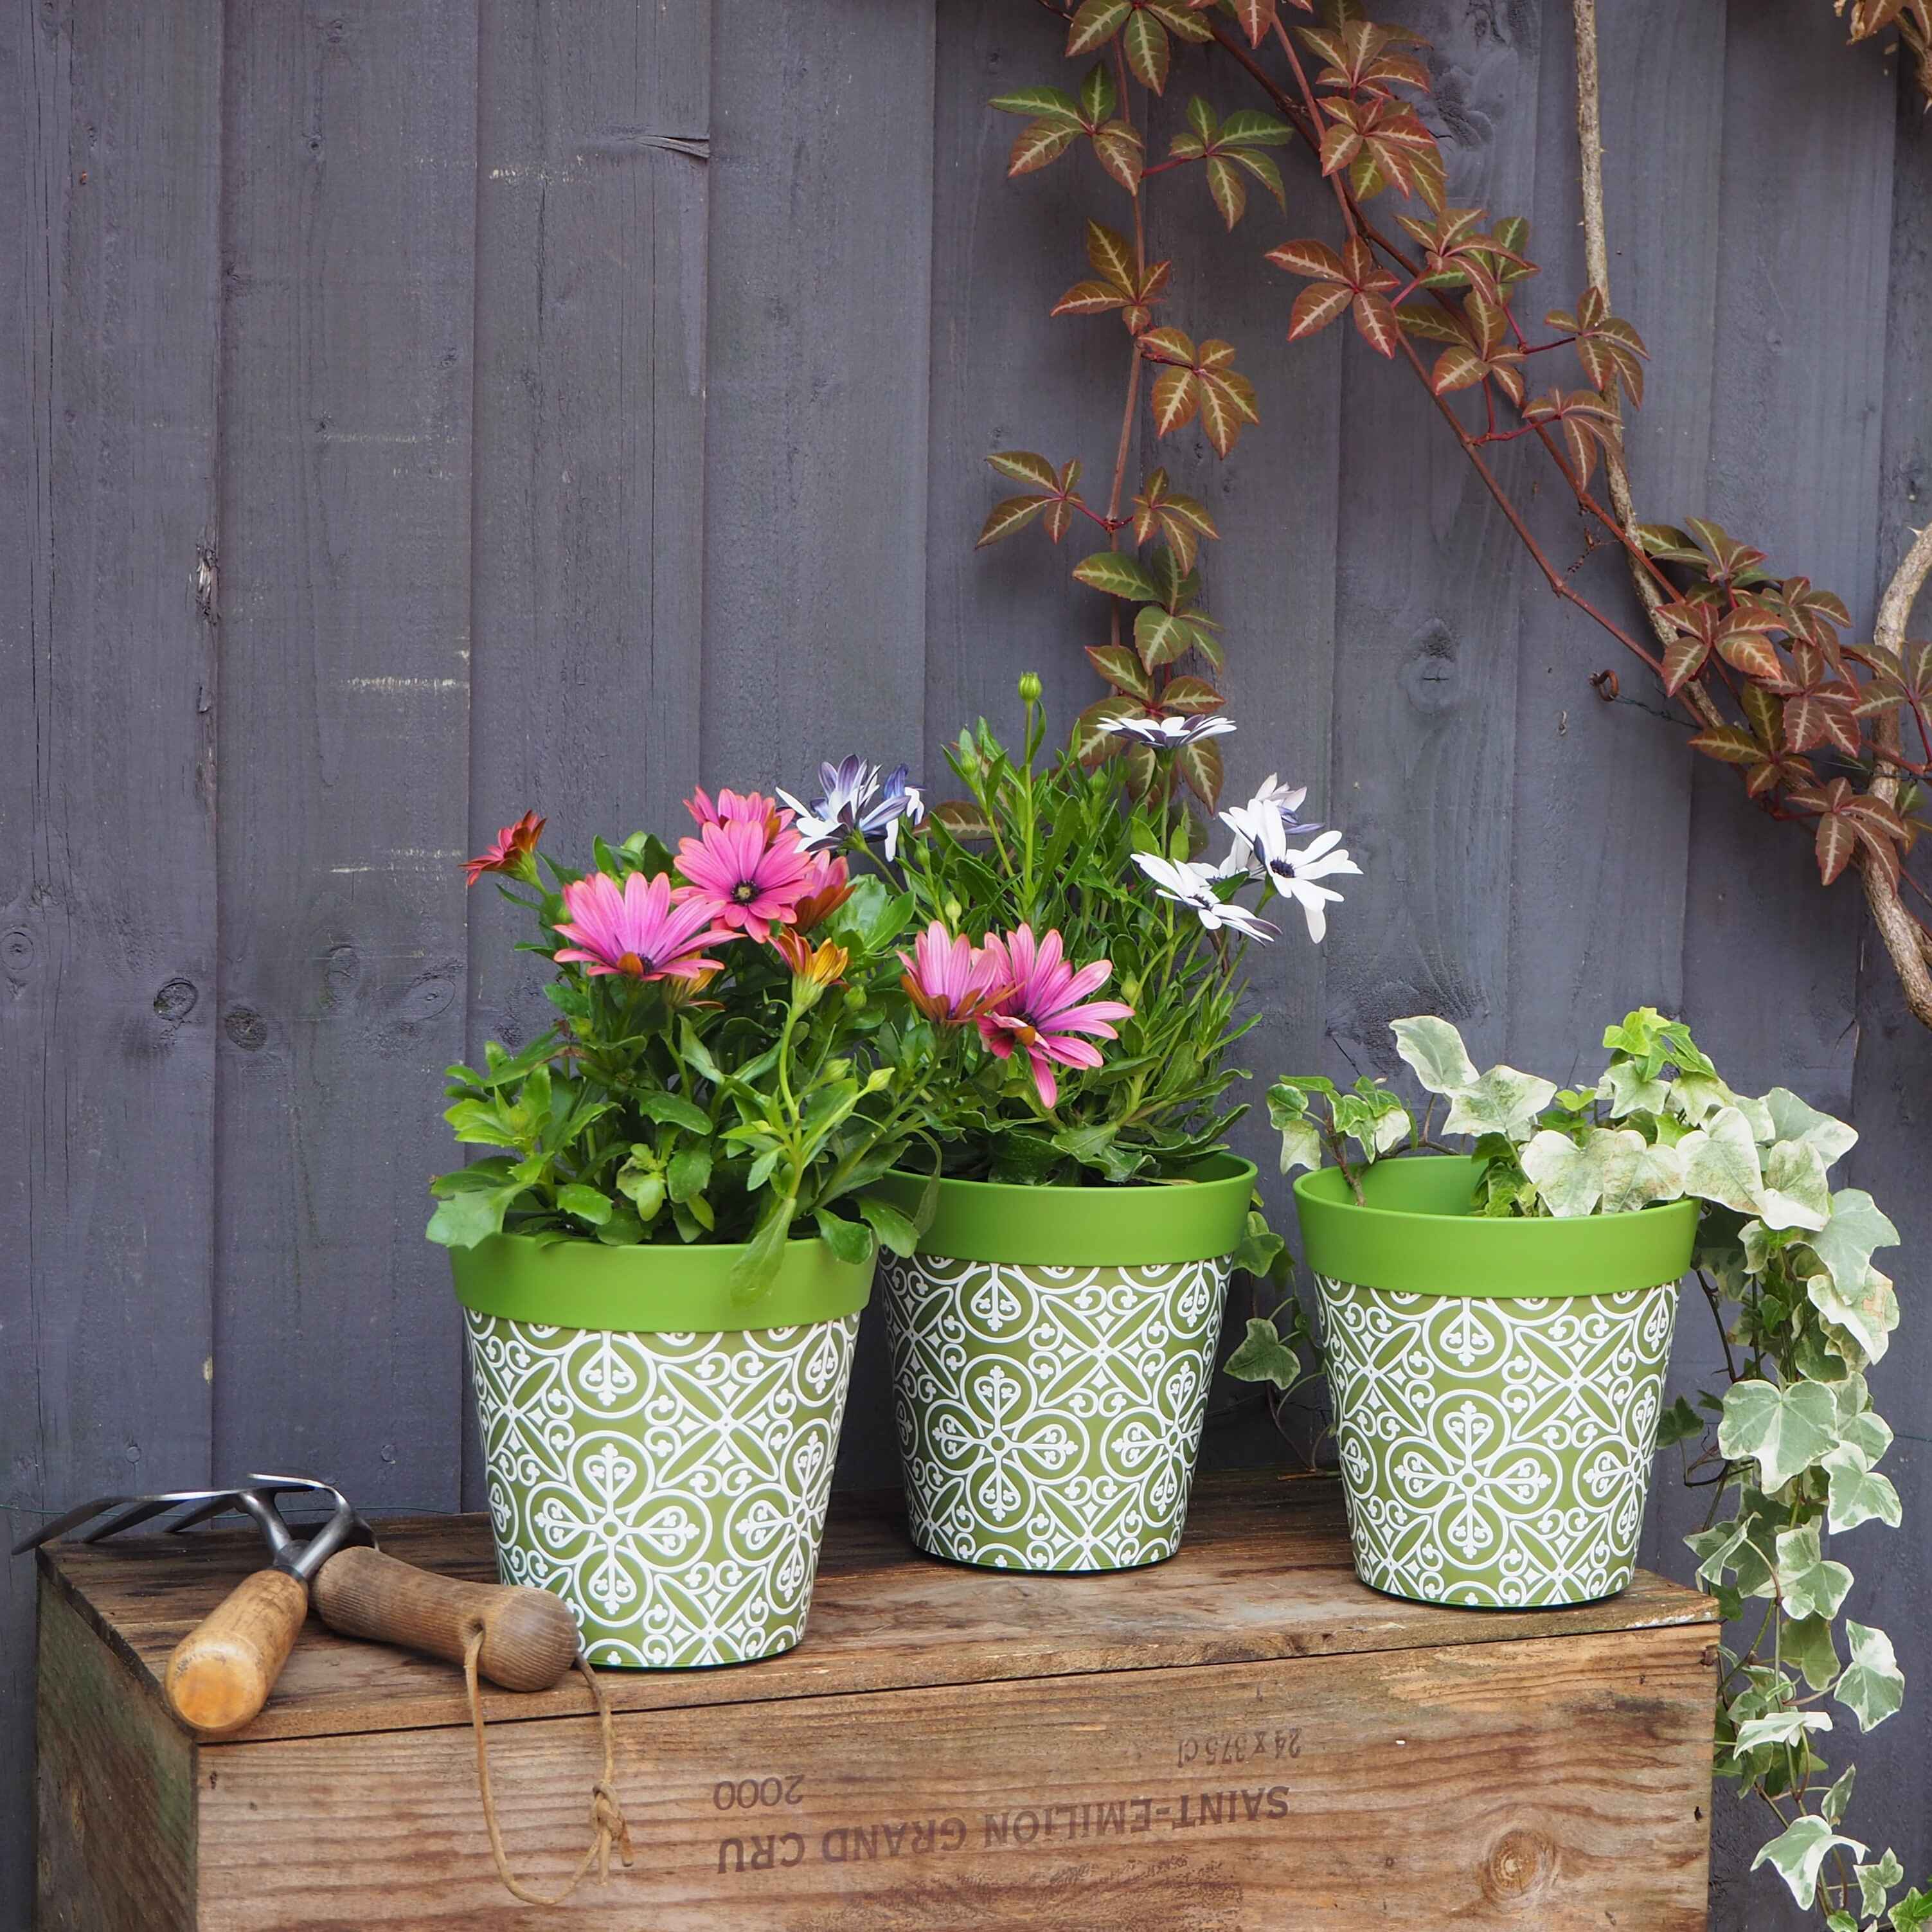 green planters with flowers in a garden against a grey fence